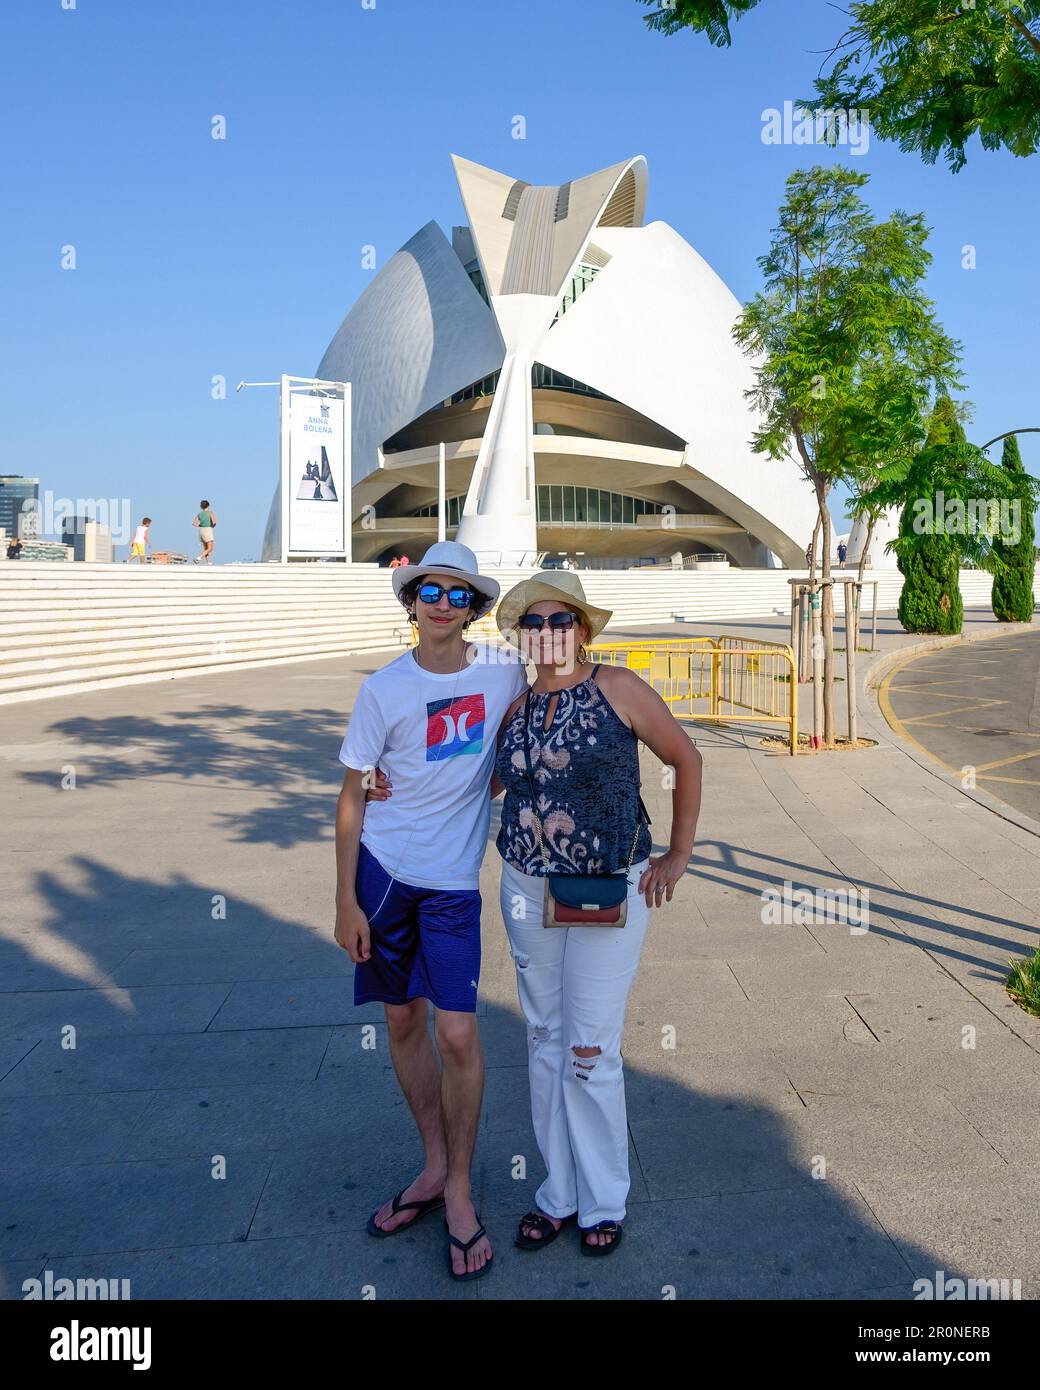 Valencia, Spain - July 17, 2022: Portrait of a Latin American family doing tourism. The Palau de les Arts or Palace of Arts is the background. Candid Stock Photo